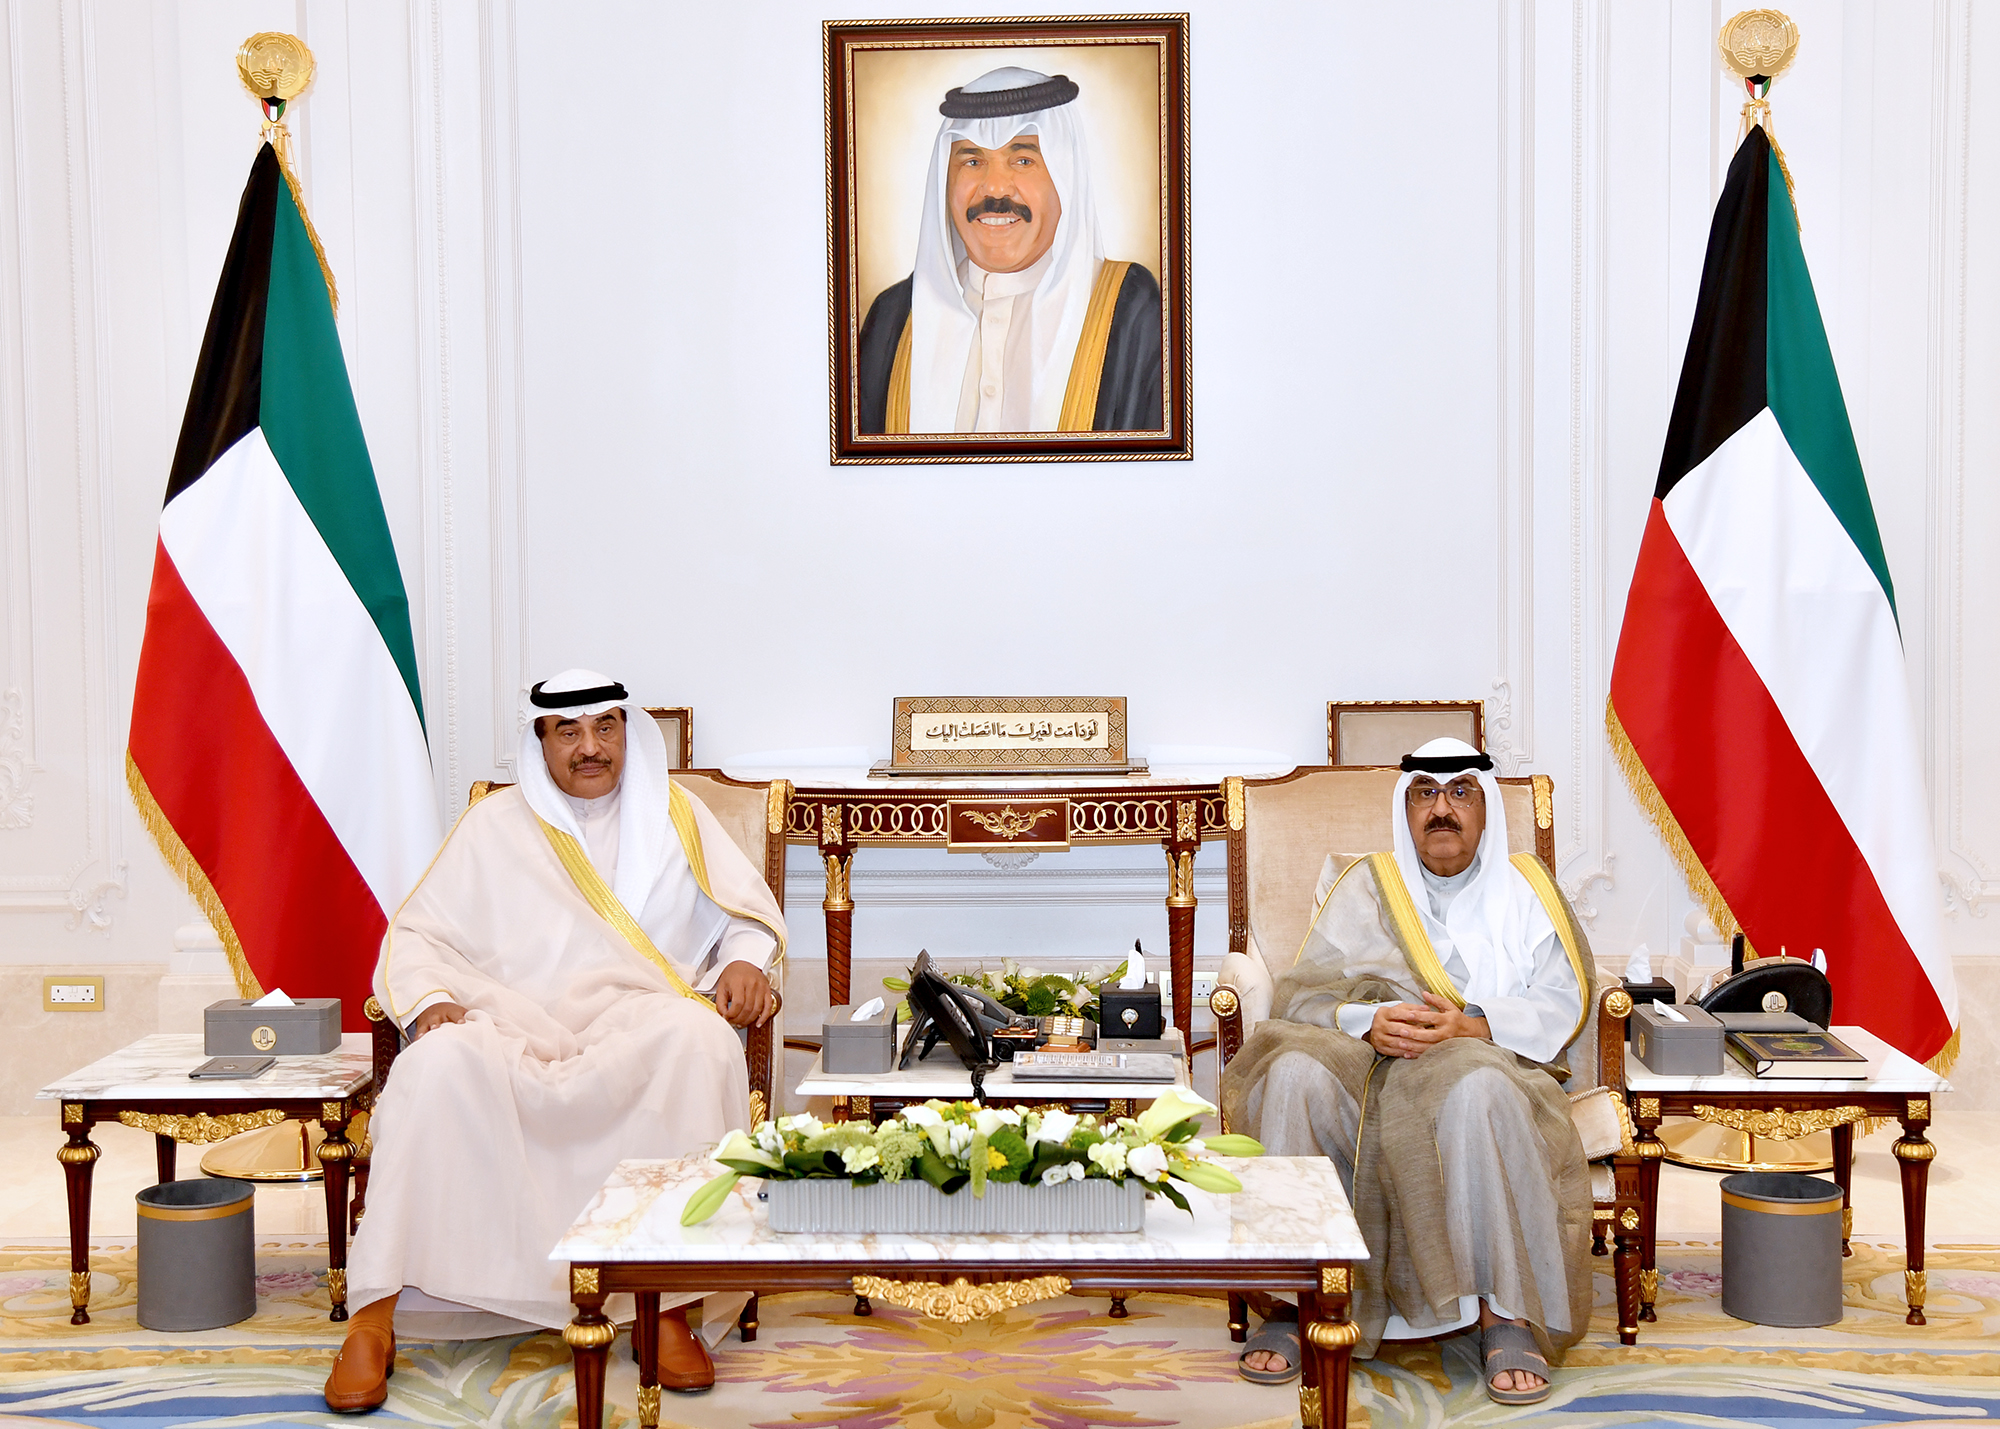 His Highness the Crown Prince receiving His Highness Sheikh Sabah Al-Khaled
